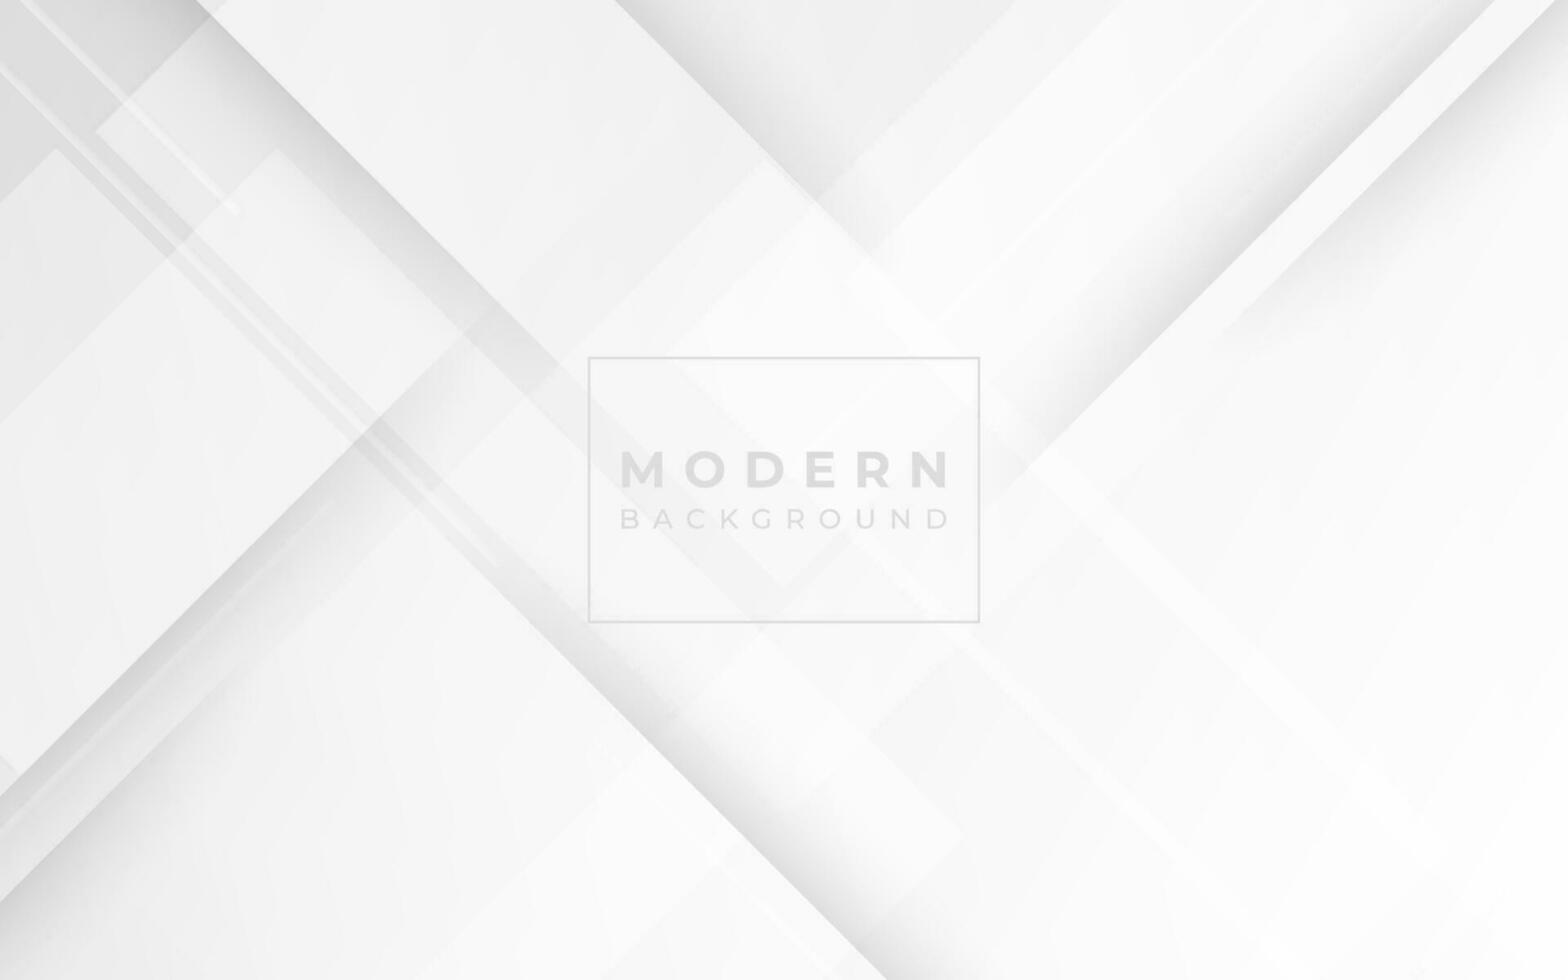 Modern background, geometric style, white color gradation, layered, abstract elegant vector